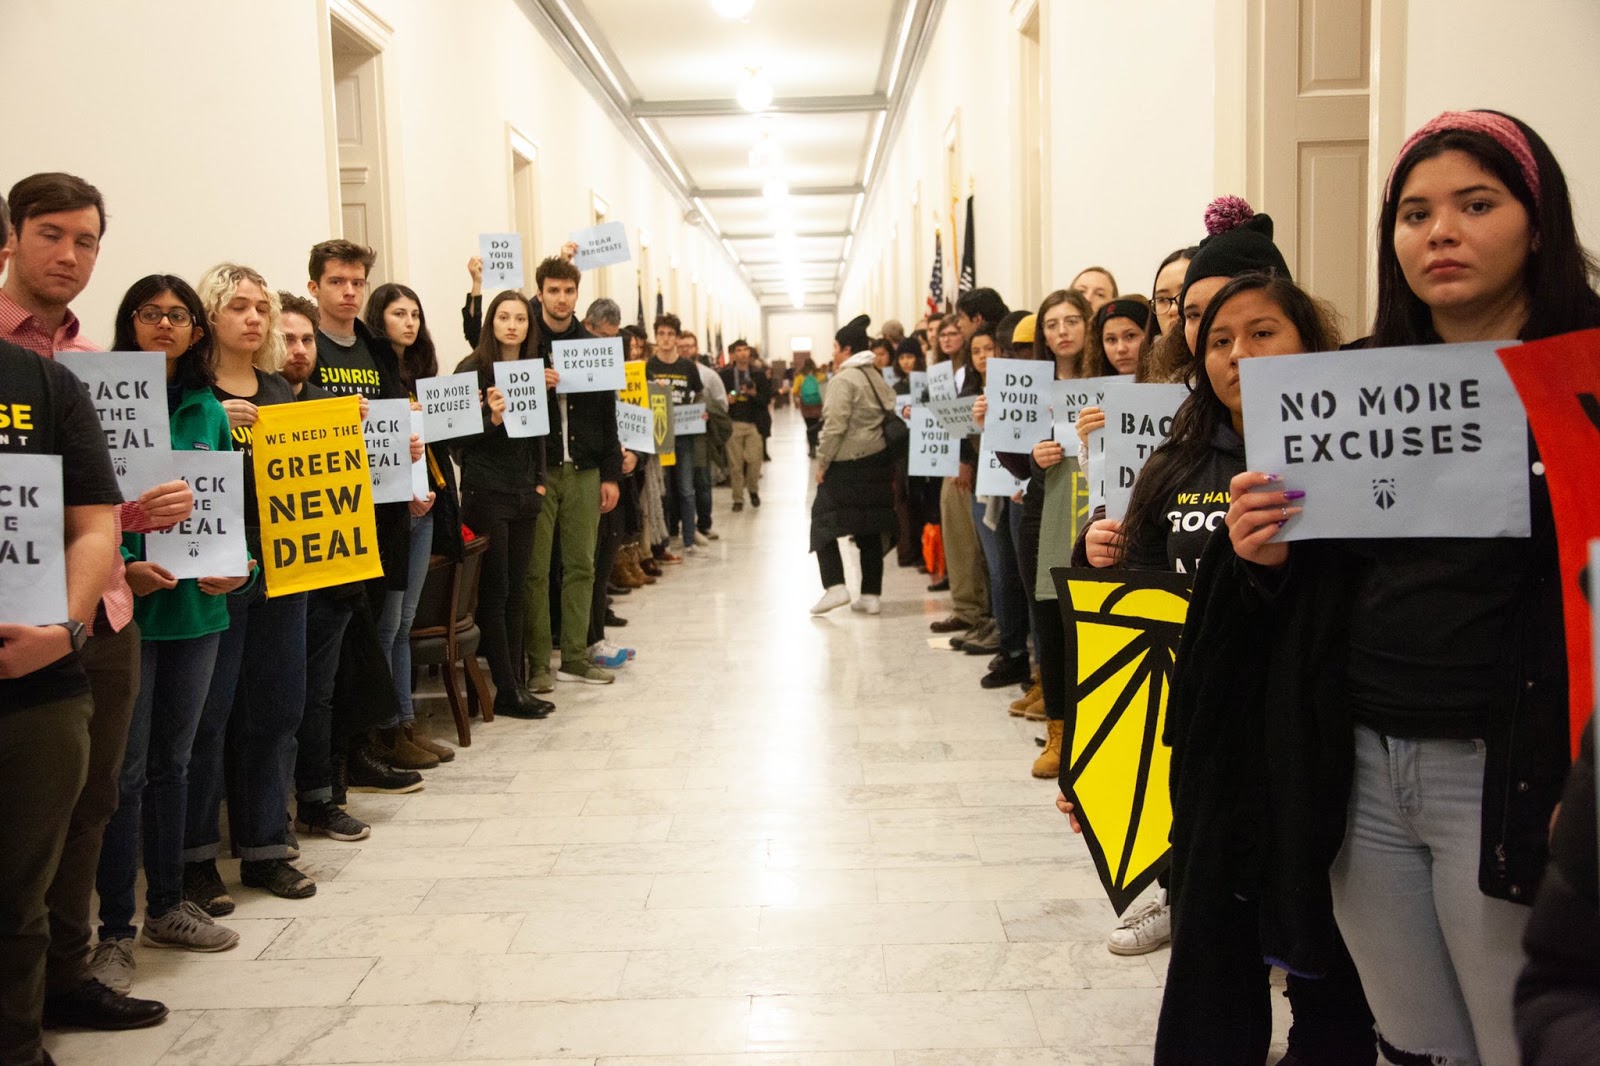 Pelosi offers meeting to Green New Deal activists as 61 protesters are arrested at her ...